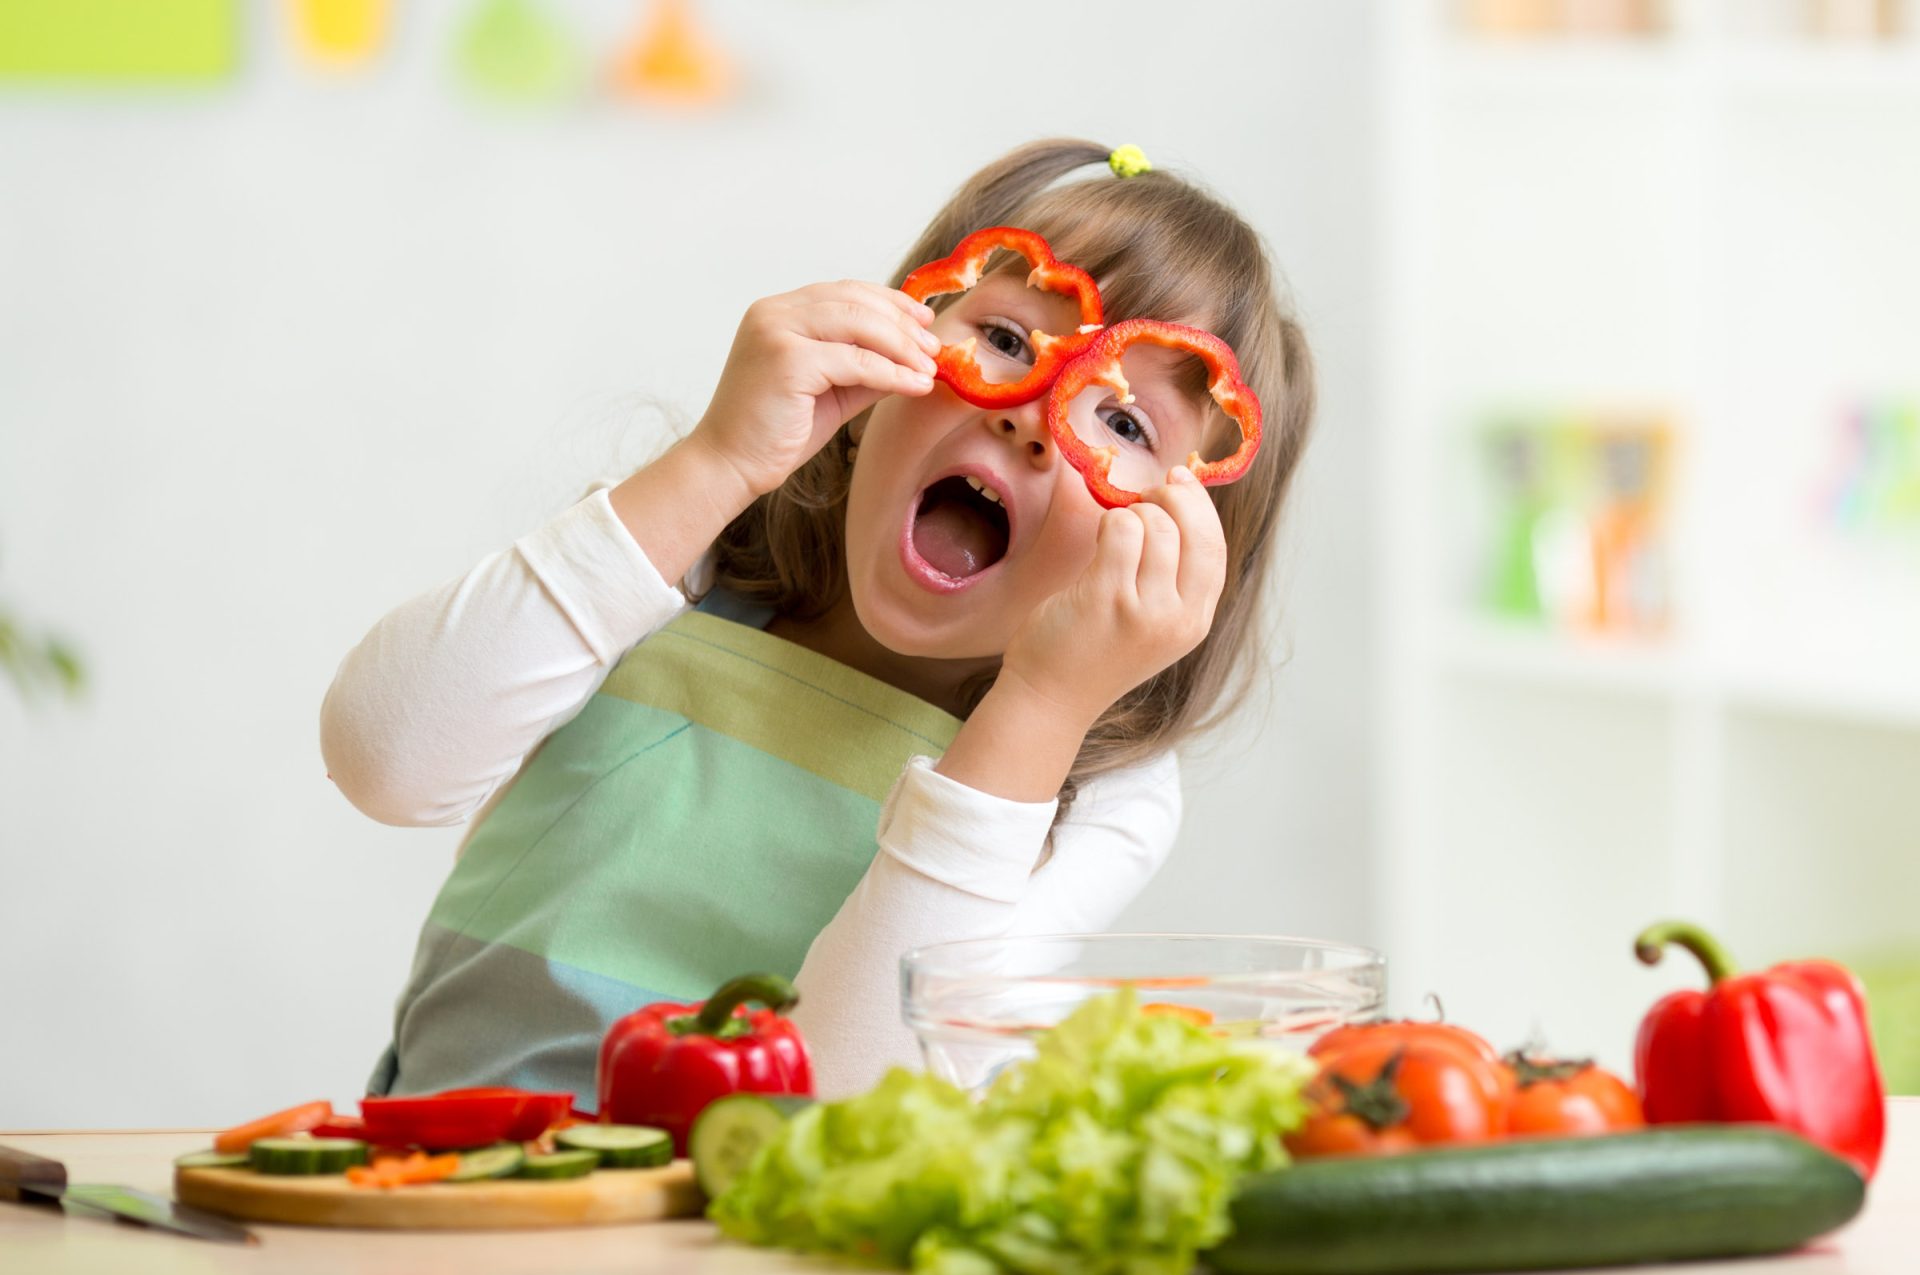 kid girl having fun with food vegetables at kitchen